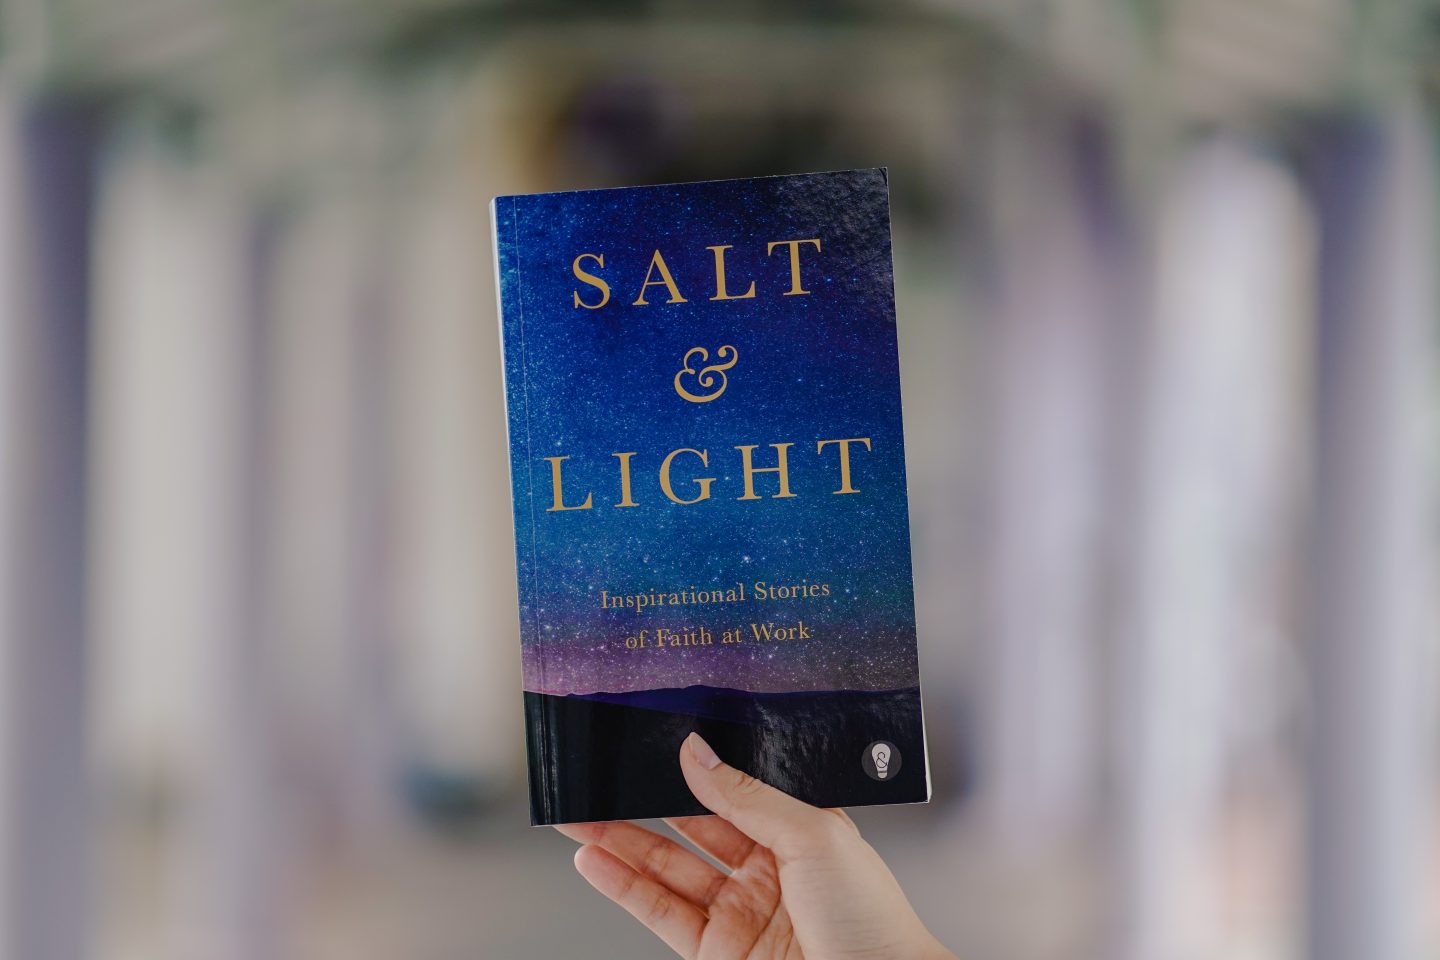 "God becomes so real and accessible with all these 'witness accounts' of Him," says missionary Jemima Ooi after reading Salt&Light: Inspirational Stories of Faith At Work. Last day for deliveries of book orders to arrive before Christmas is Dec 15.